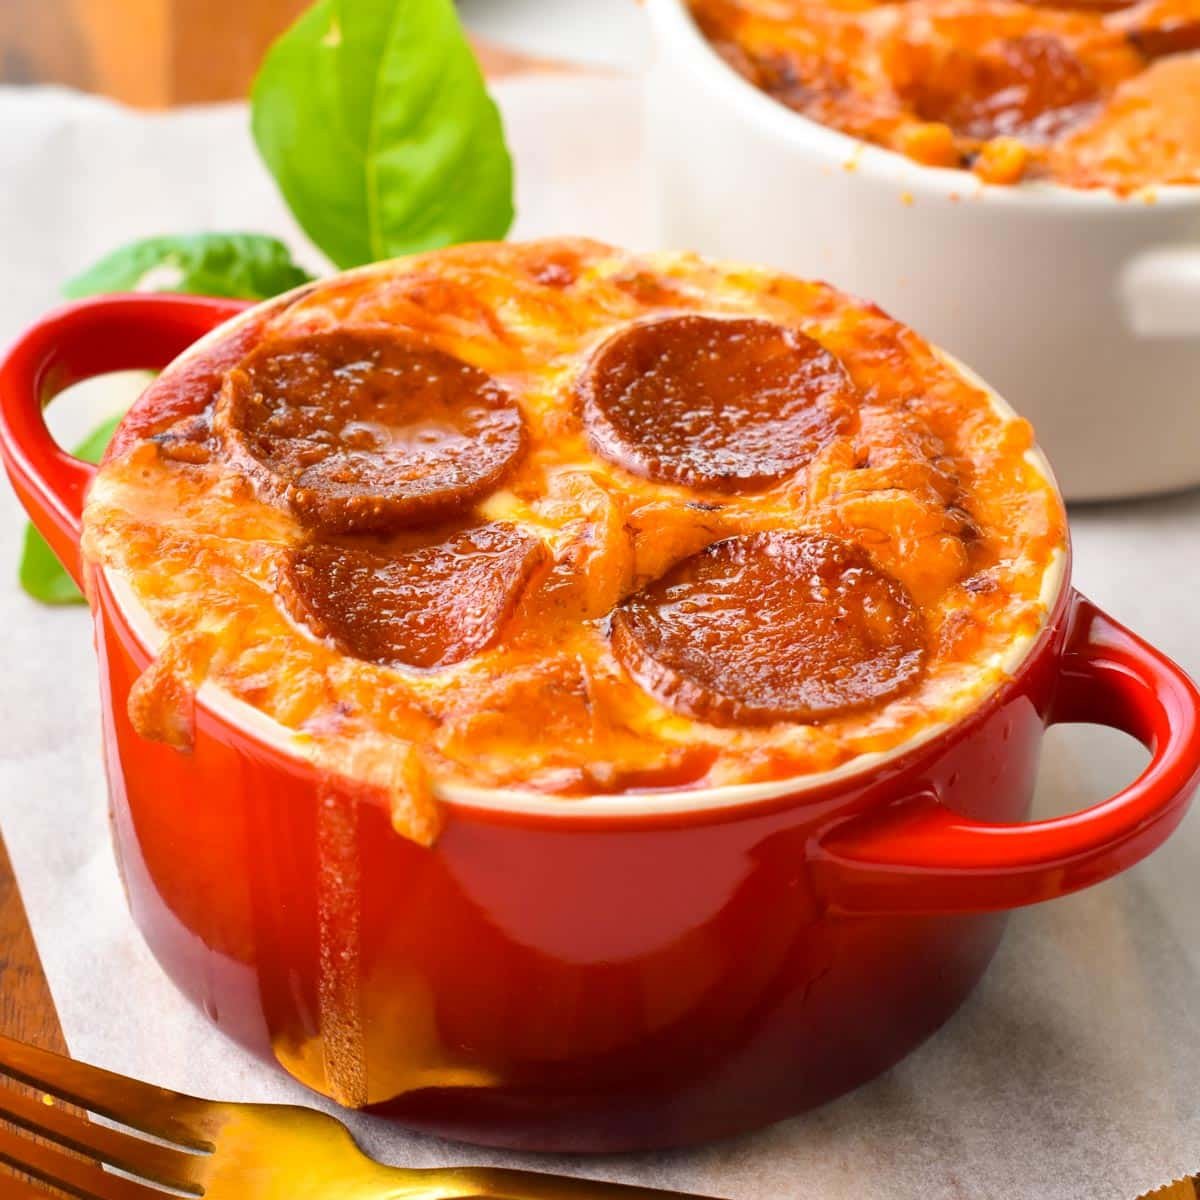 a red ramekin with baked cottage cheese, grated grilled mozzarella and pepperoni slices